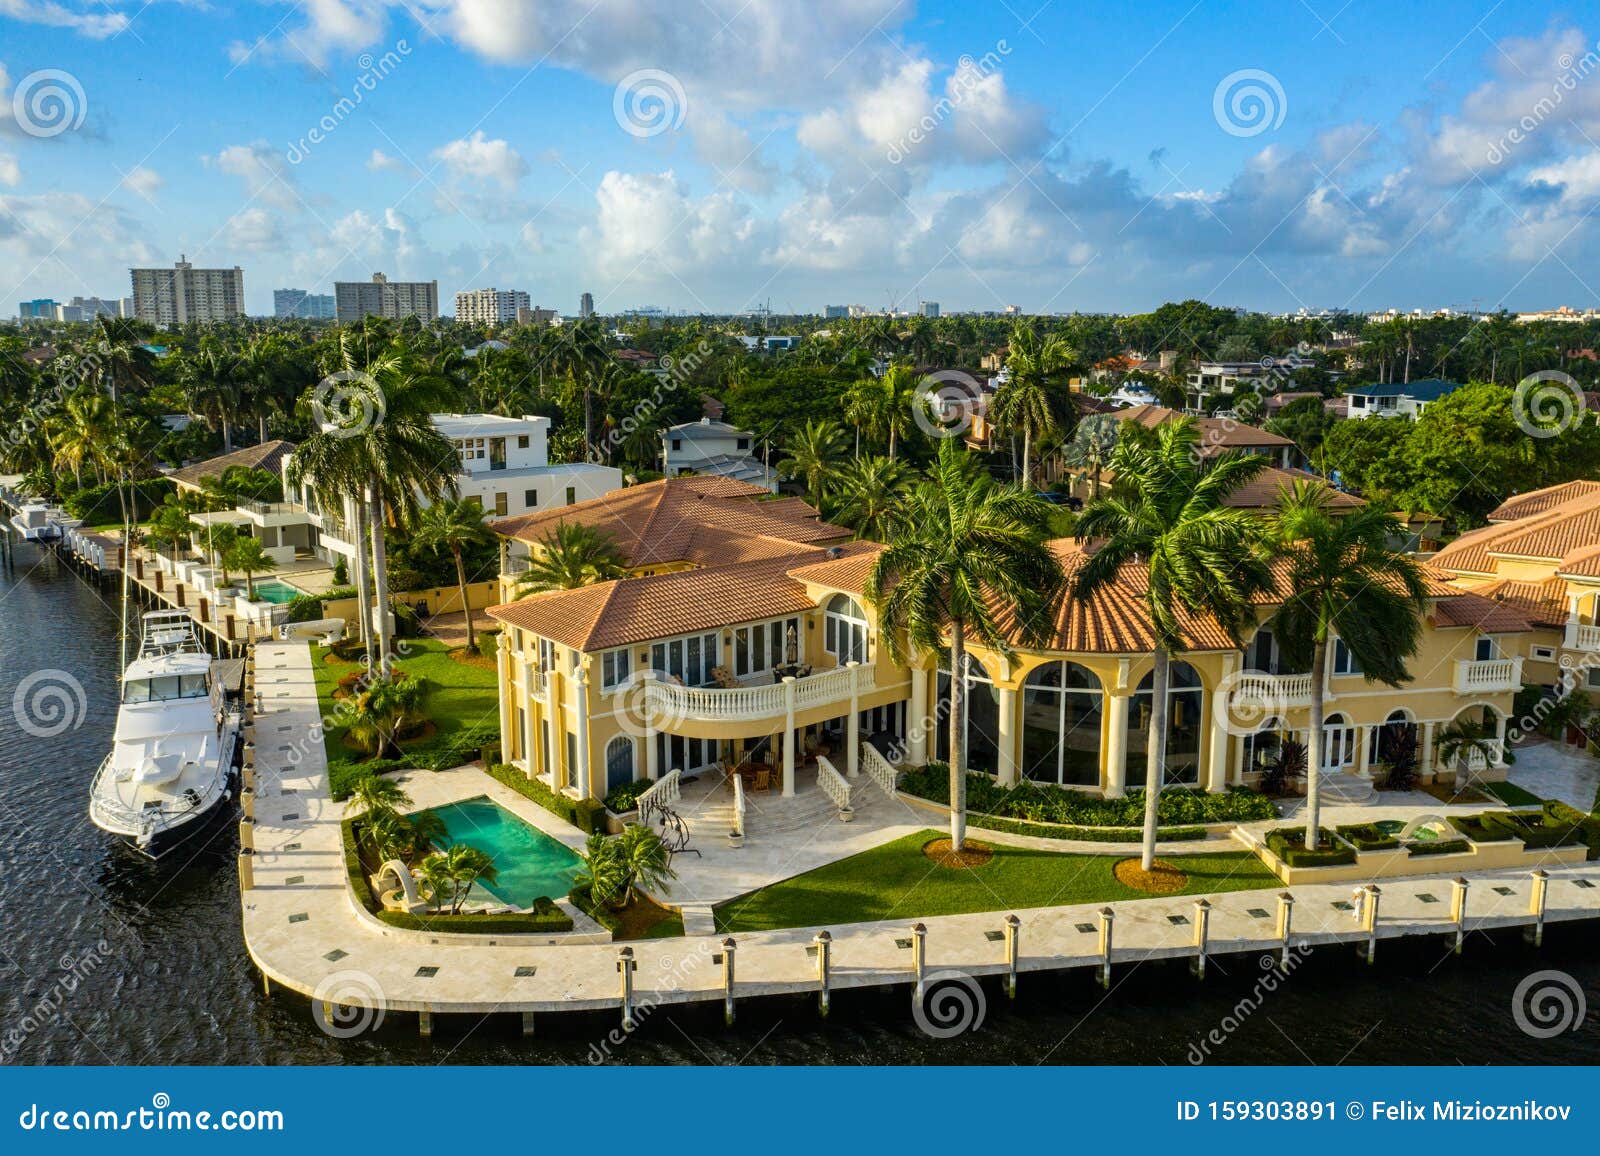 drone photo fort lauderdale fl luxury mansion homes